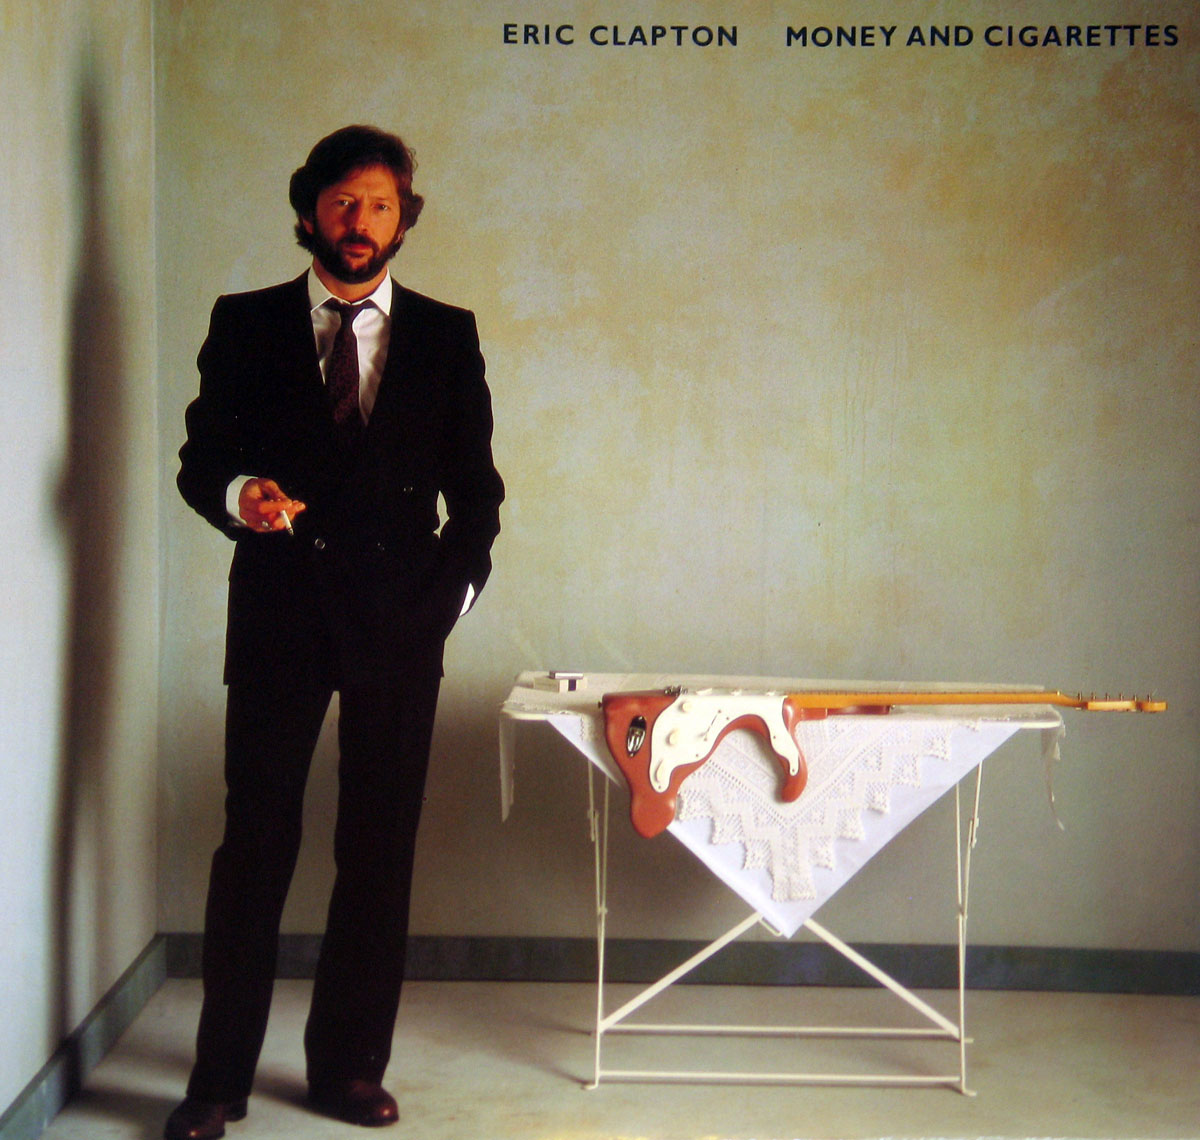 High Resolution Photo ERIC CLAPTON Money and Cigarettes 